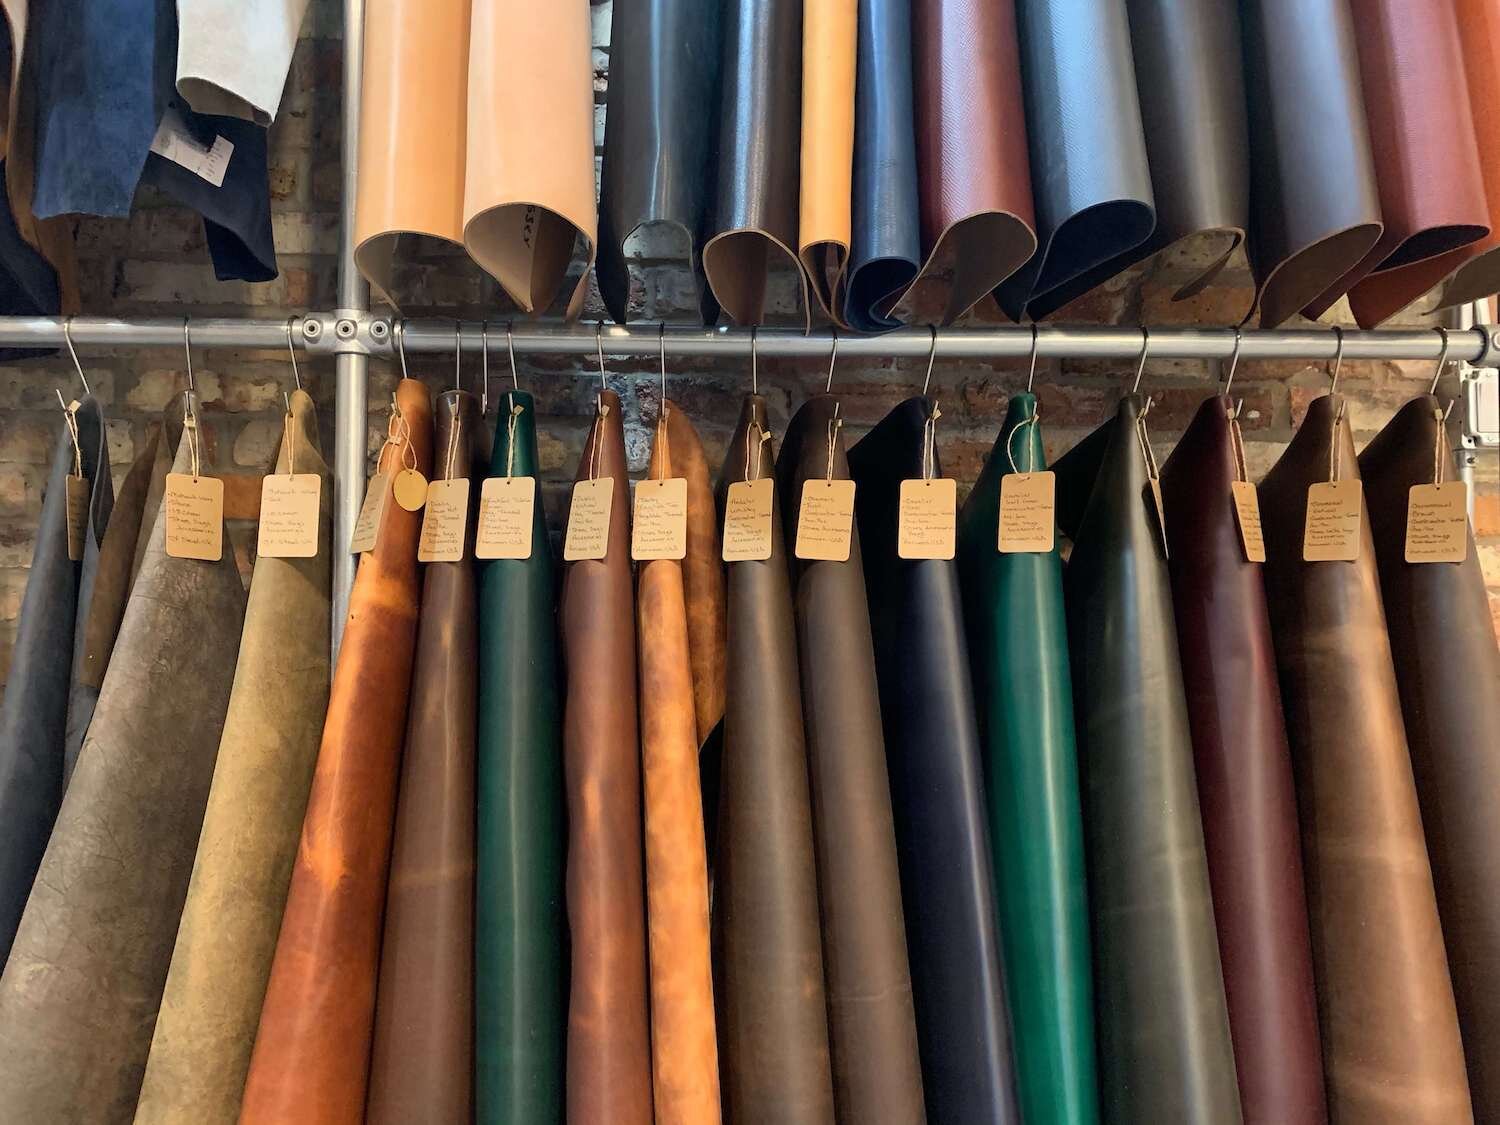 Horween Montana Bison Leather, The Tannery Row